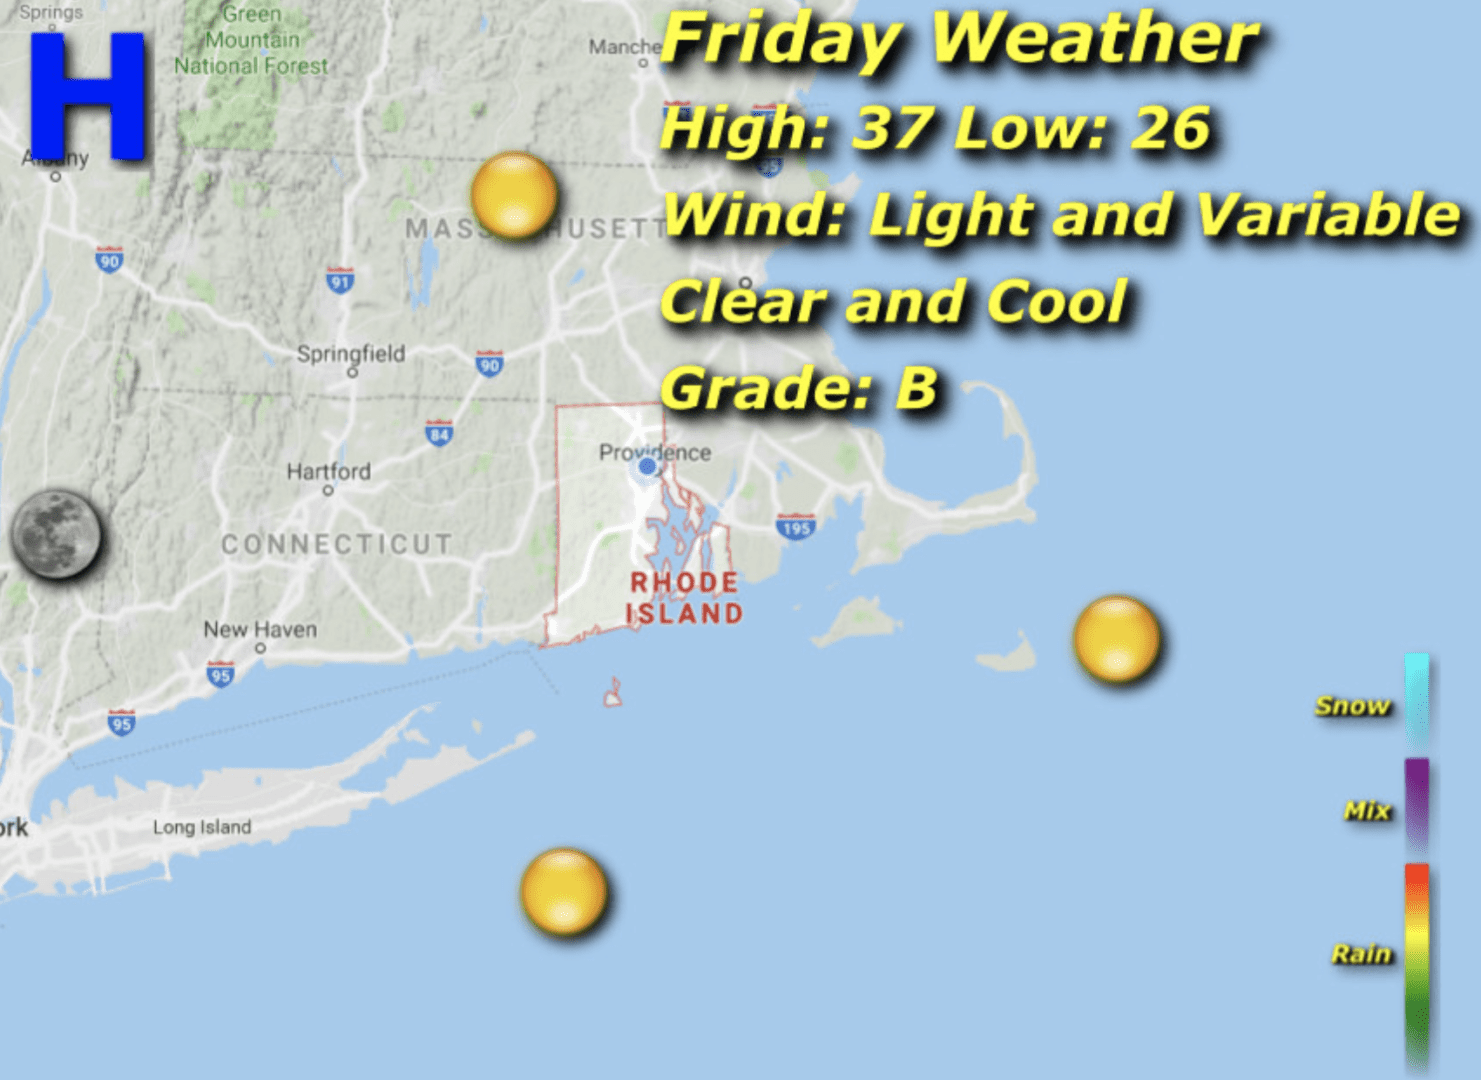 A map showing the weather for Friday in Rhode Island.